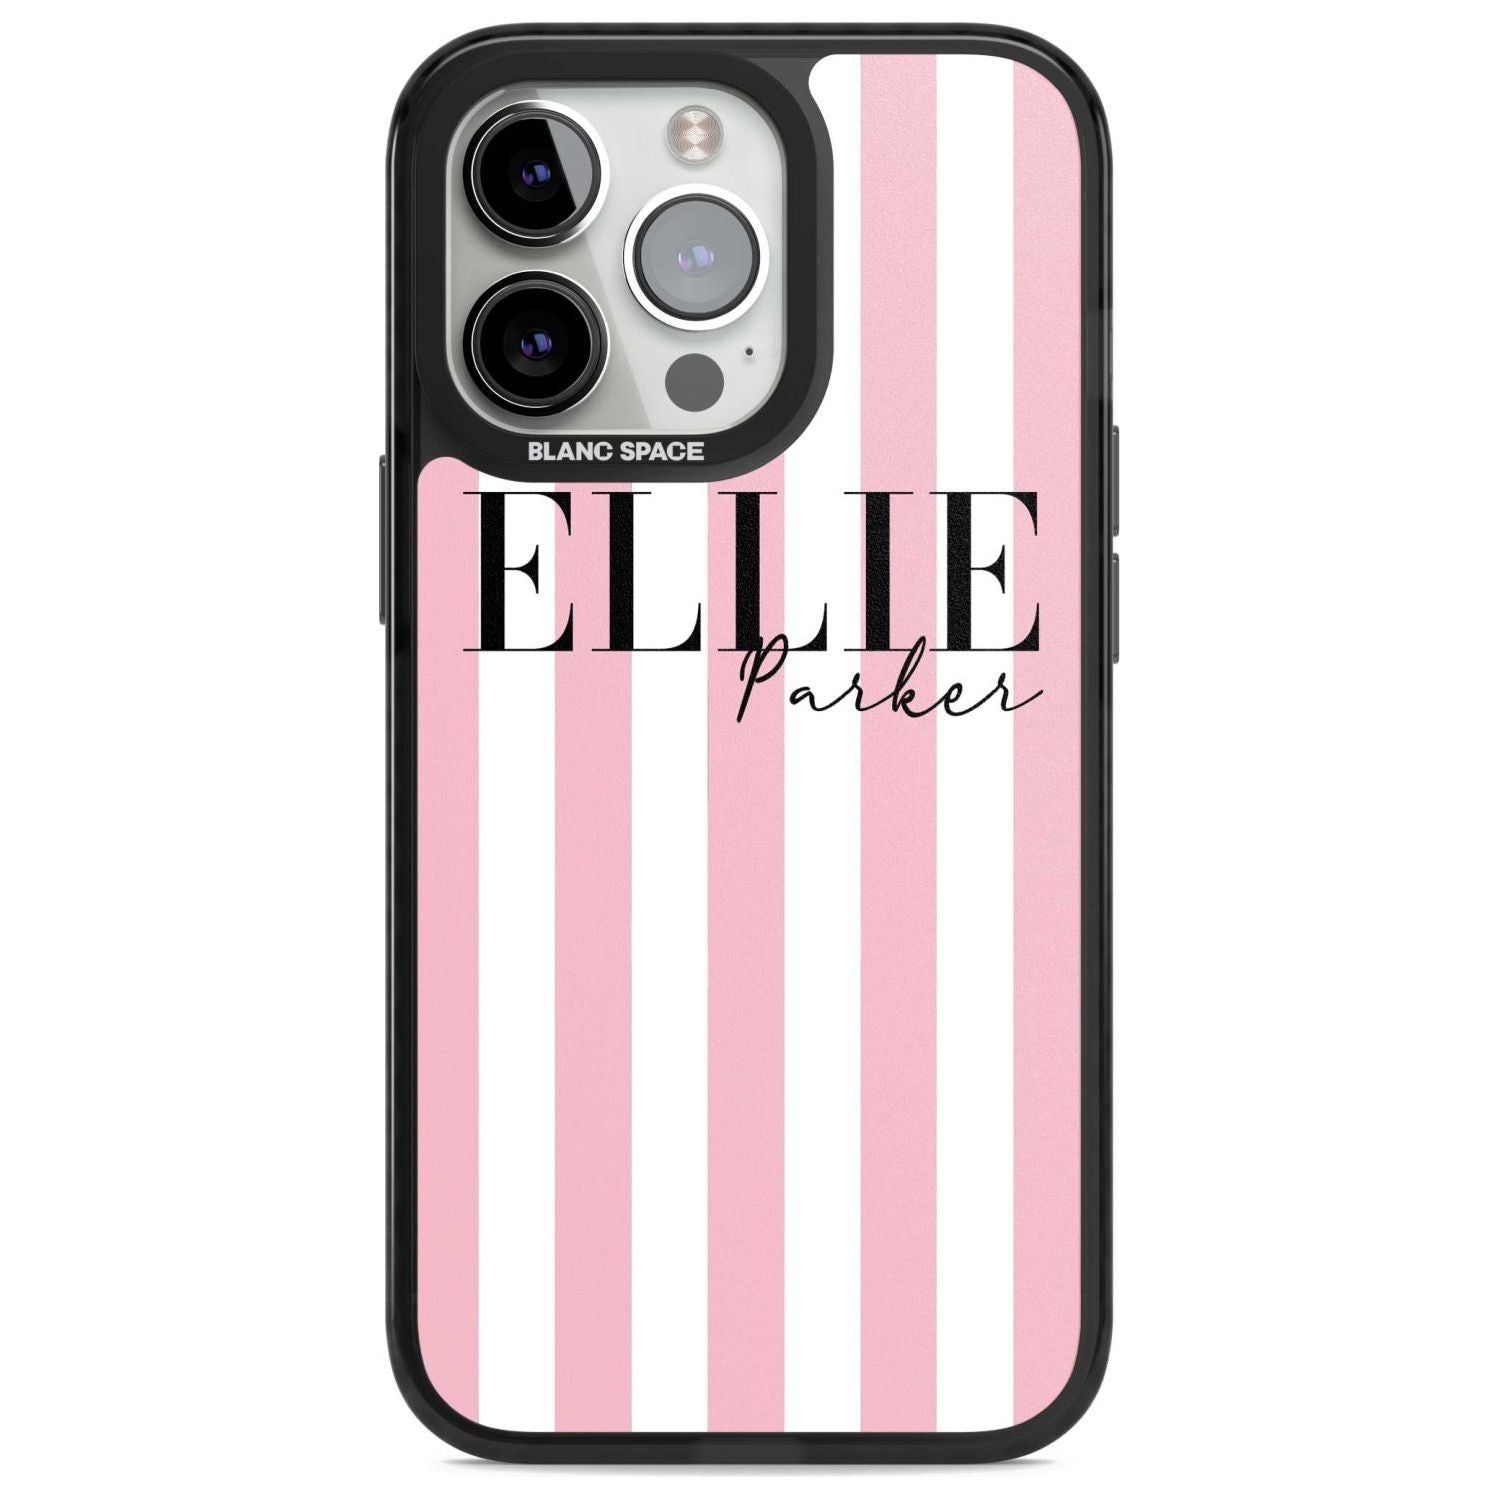 Personalised Pink Stripes Custom Phone Case iPhone 15 Pro Max / Magsafe Black Impact Case,iPhone 15 Pro / Magsafe Black Impact Case,iPhone 14 Pro Max / Magsafe Black Impact Case,iPhone 14 Pro / Magsafe Black Impact Case,iPhone 13 Pro / Magsafe Black Impact Case Blanc Space